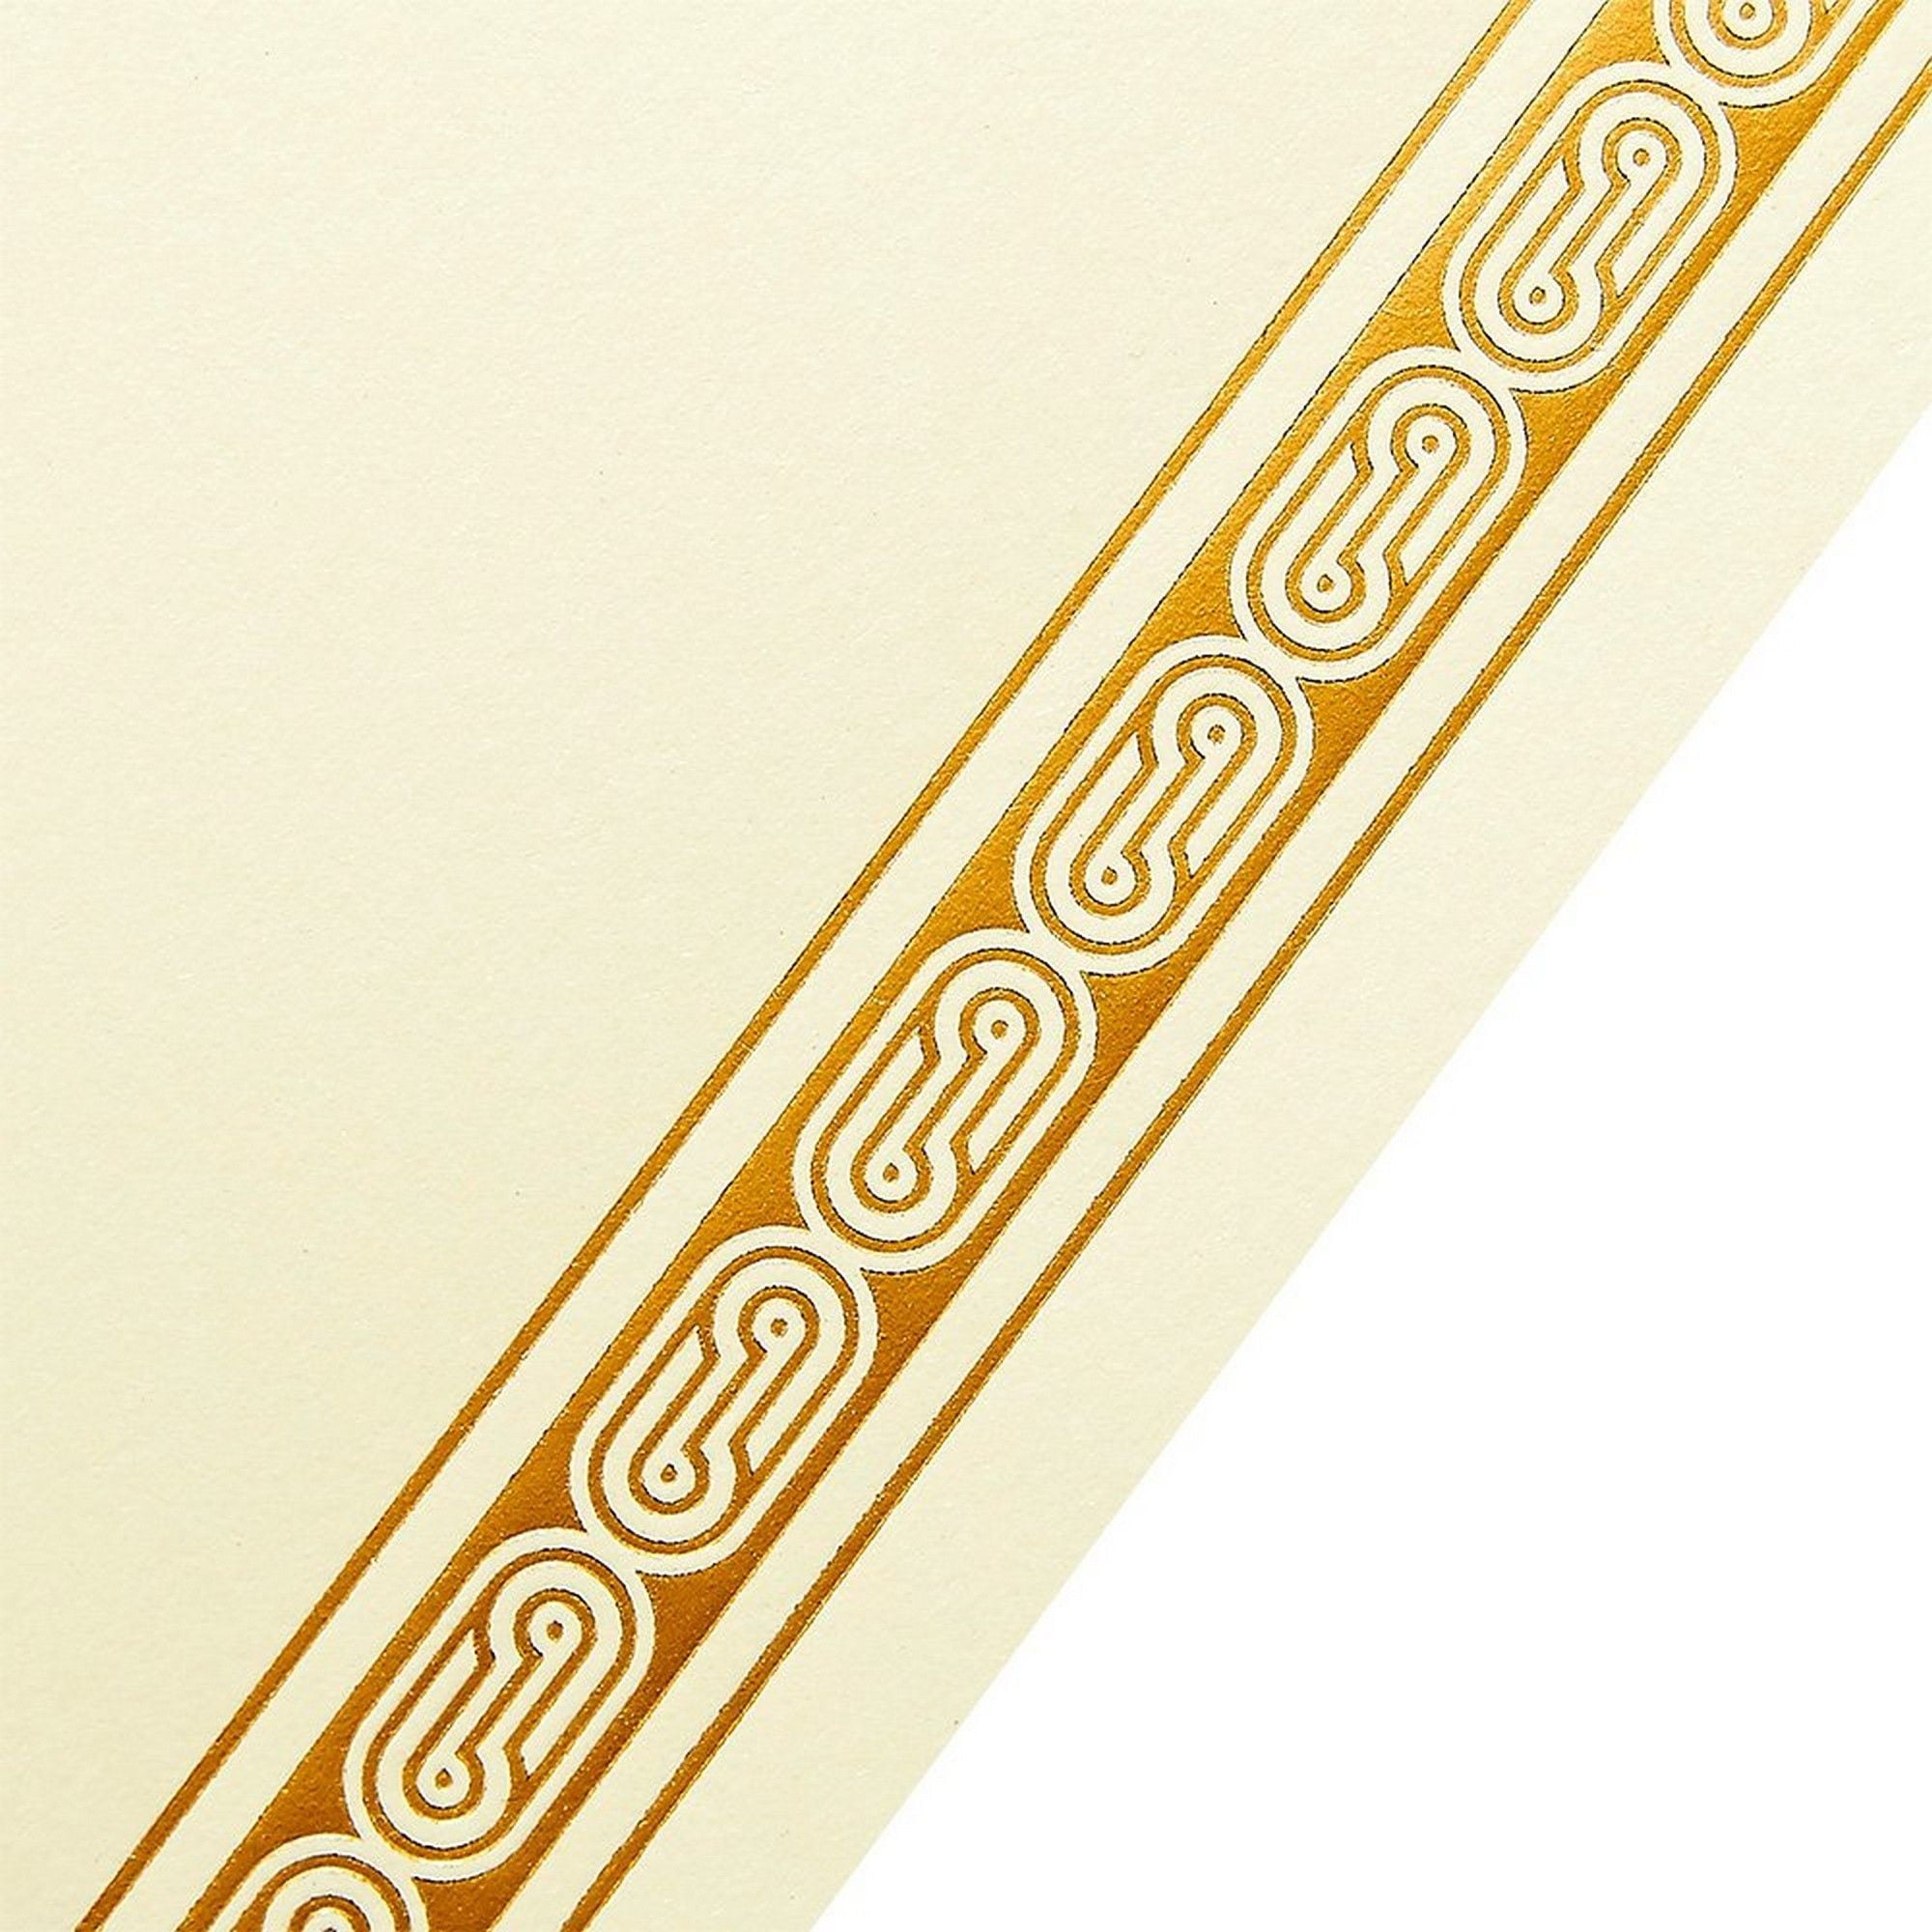 Gold Foil Leaves Border Specialty Recognition Diploma Paper 8.5 x 11 inches Juvale Laser and Inkjet Printer Friendly 48 Pack Certificate Papers Letter Size Blank Award Certificates Paper Gold